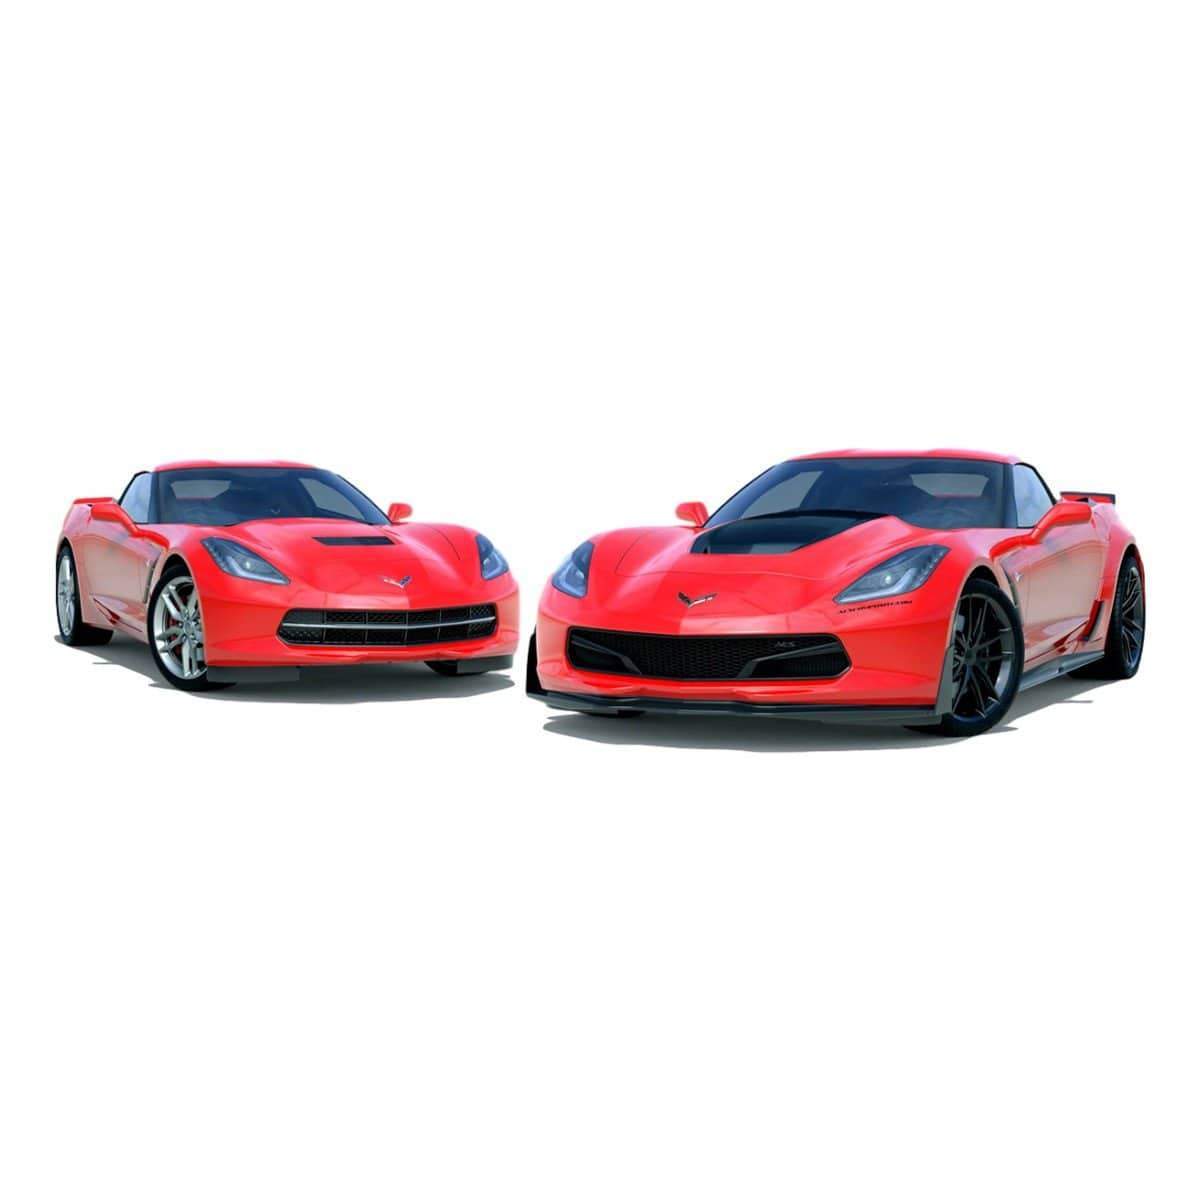 ACS Composite Convertible Rear Widebody Kit for C7 Corvette Stingray 45-4-101 PRM - Adds 40mm Width, Accommodates 20x12 Wheels and P335-25-20 Tires